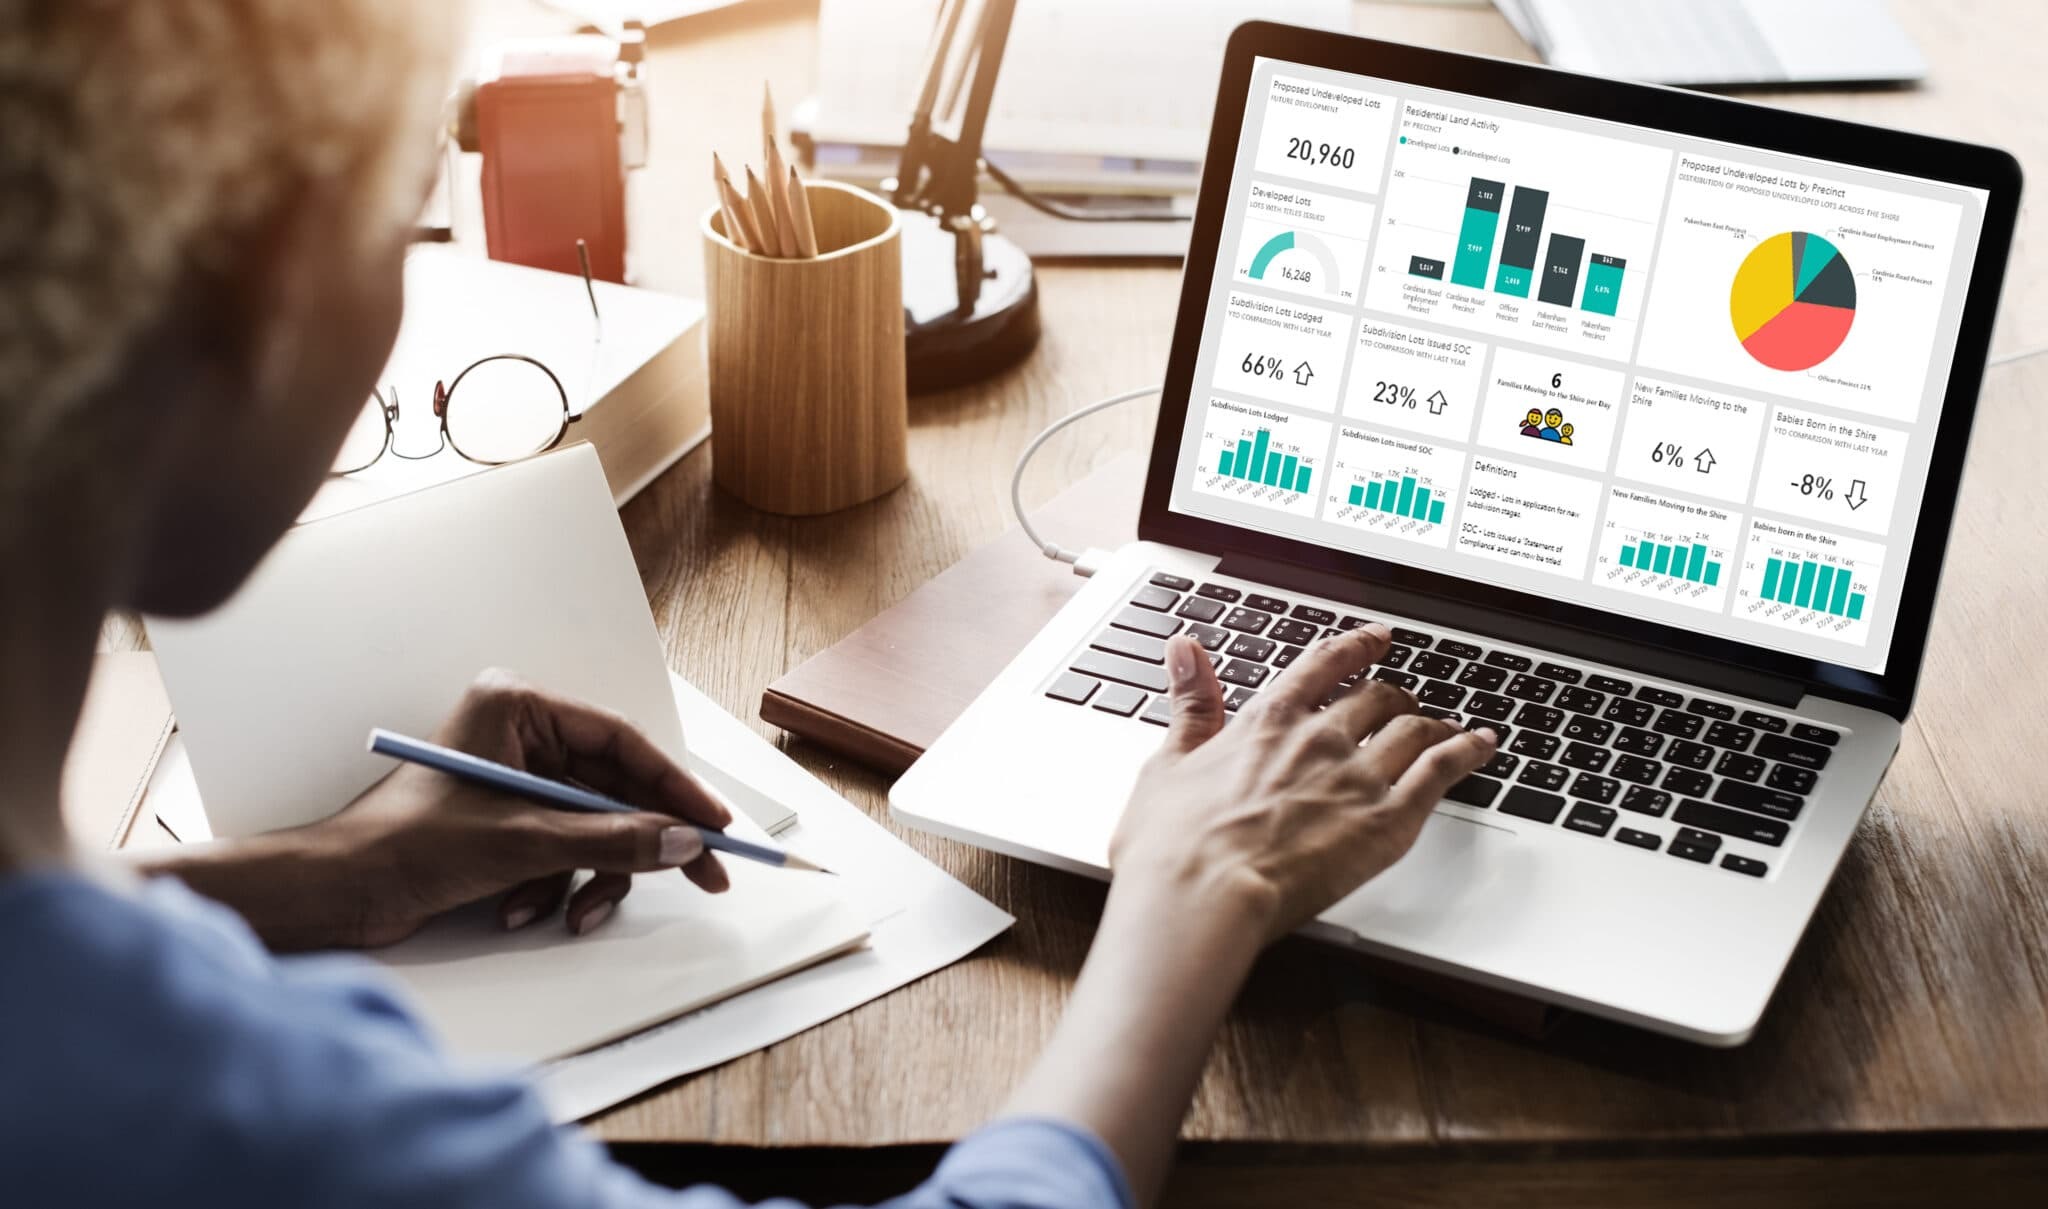 A step-by-step guide on utilizing a business analytics tool effectively. Analyze data, gain insights, and make informed decisions.